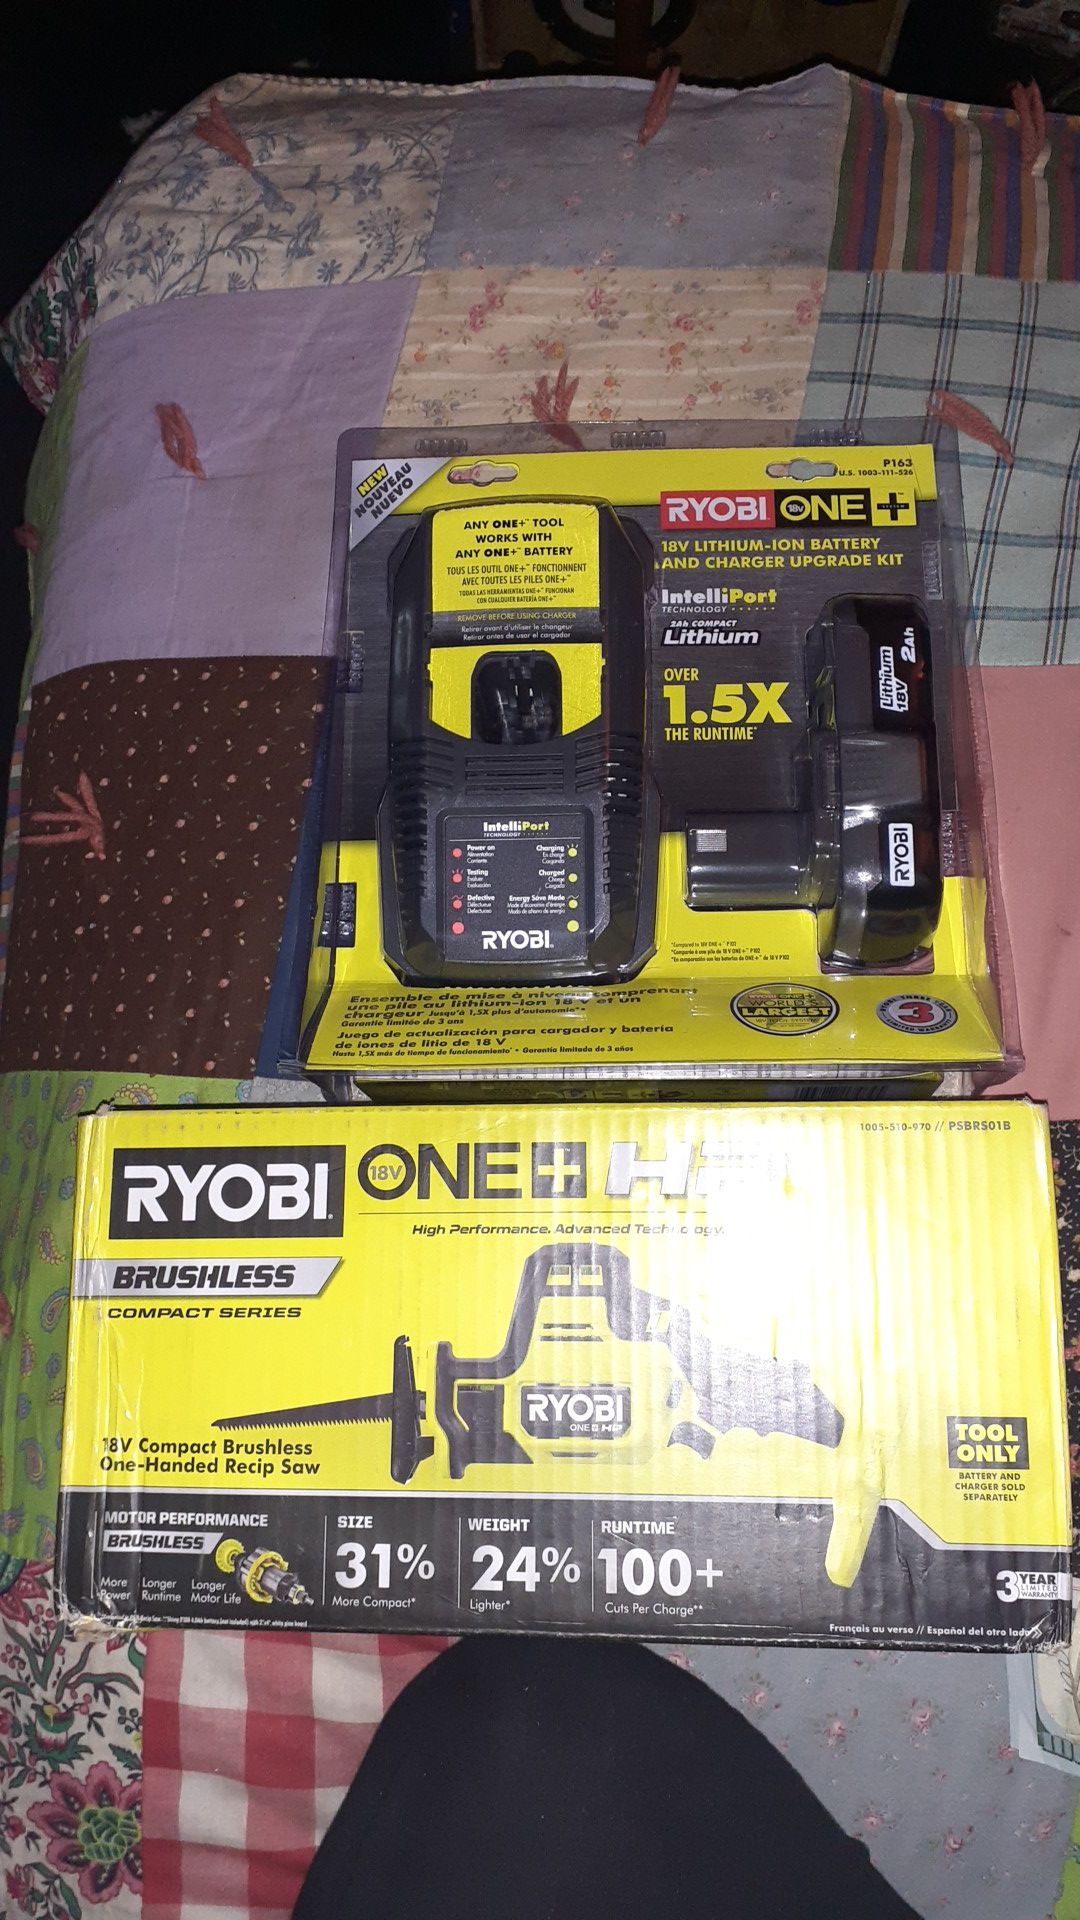 Ryobi one+HP Reciprocating saw w/battery and charger brand new